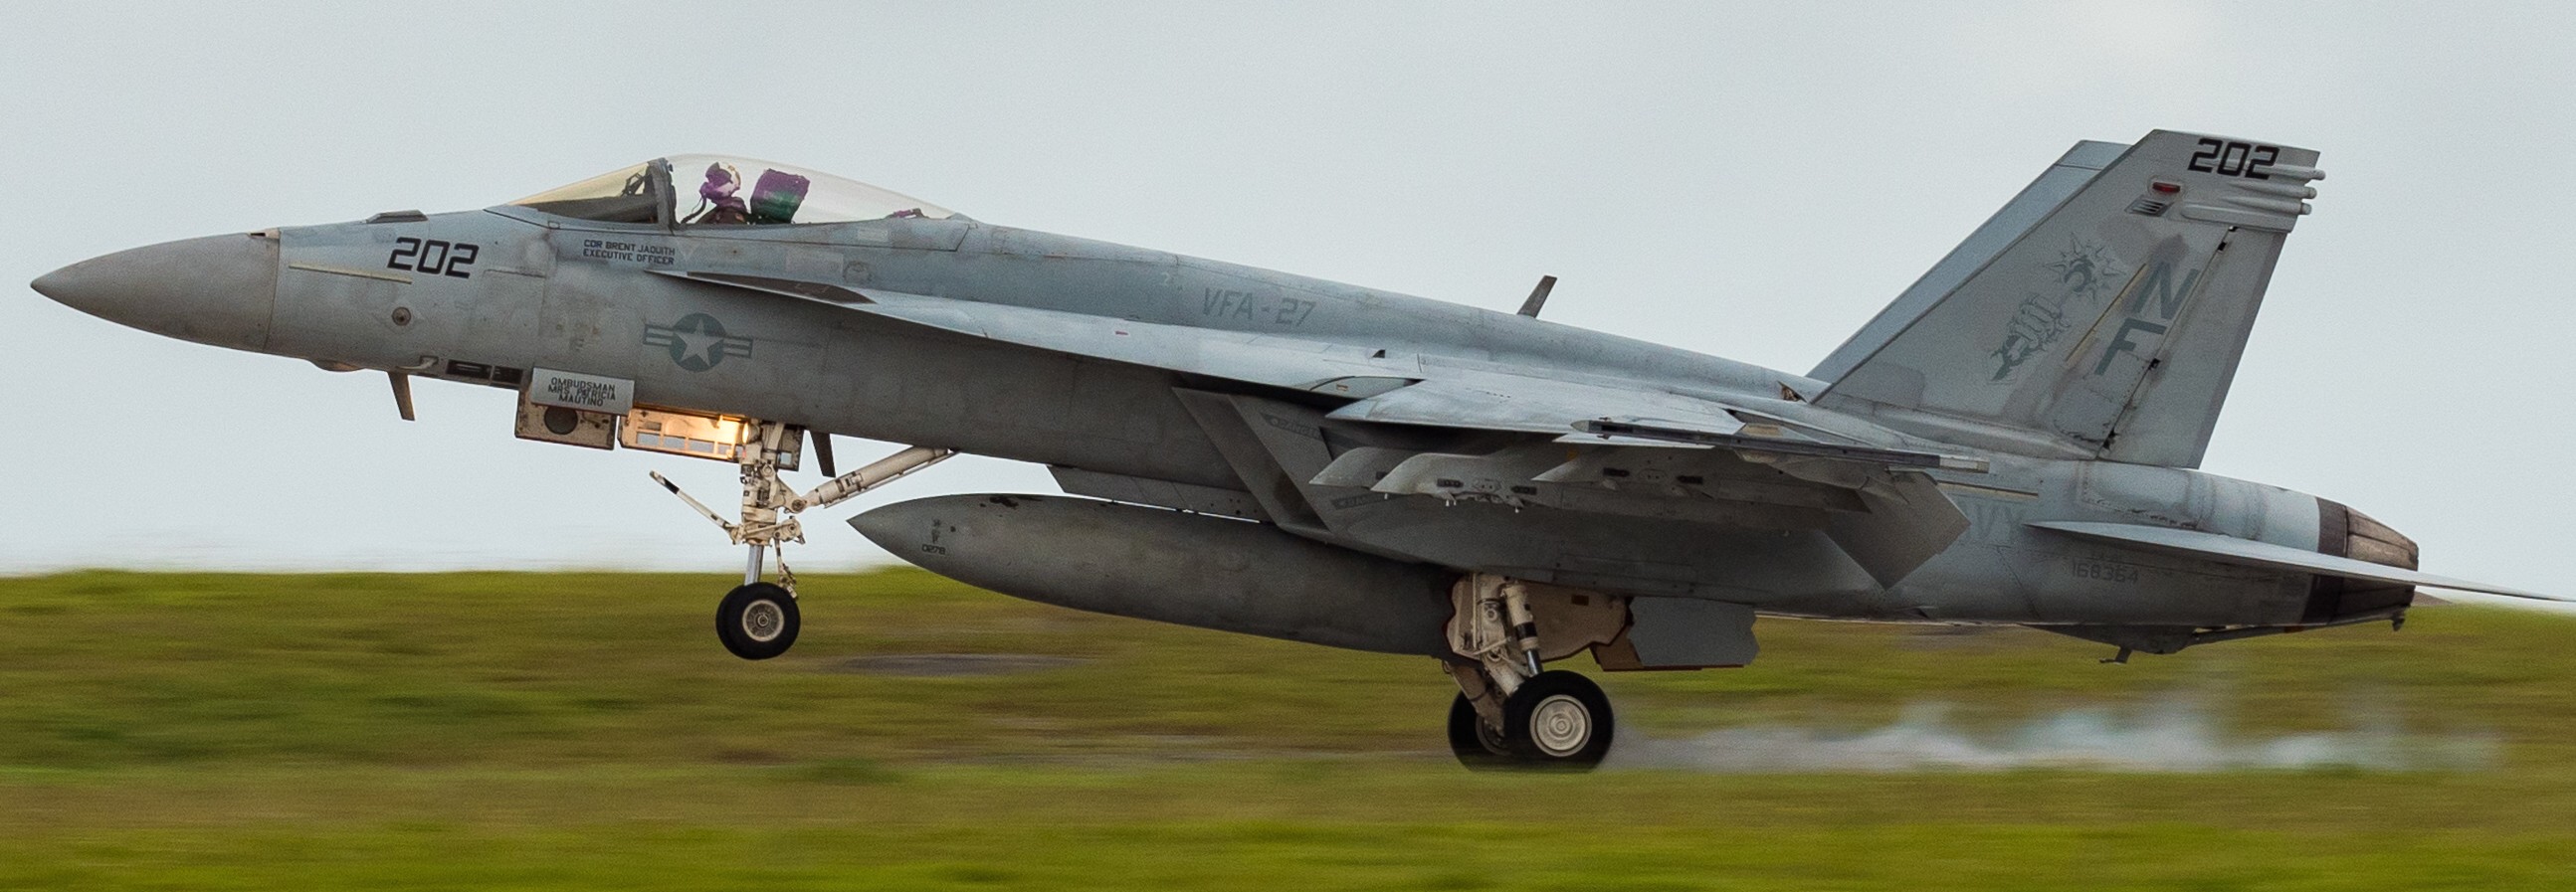 vfa-27 royal maces strike fighter squadron f/a-18e super hornet exercise valiant shield andersen afb guam 67